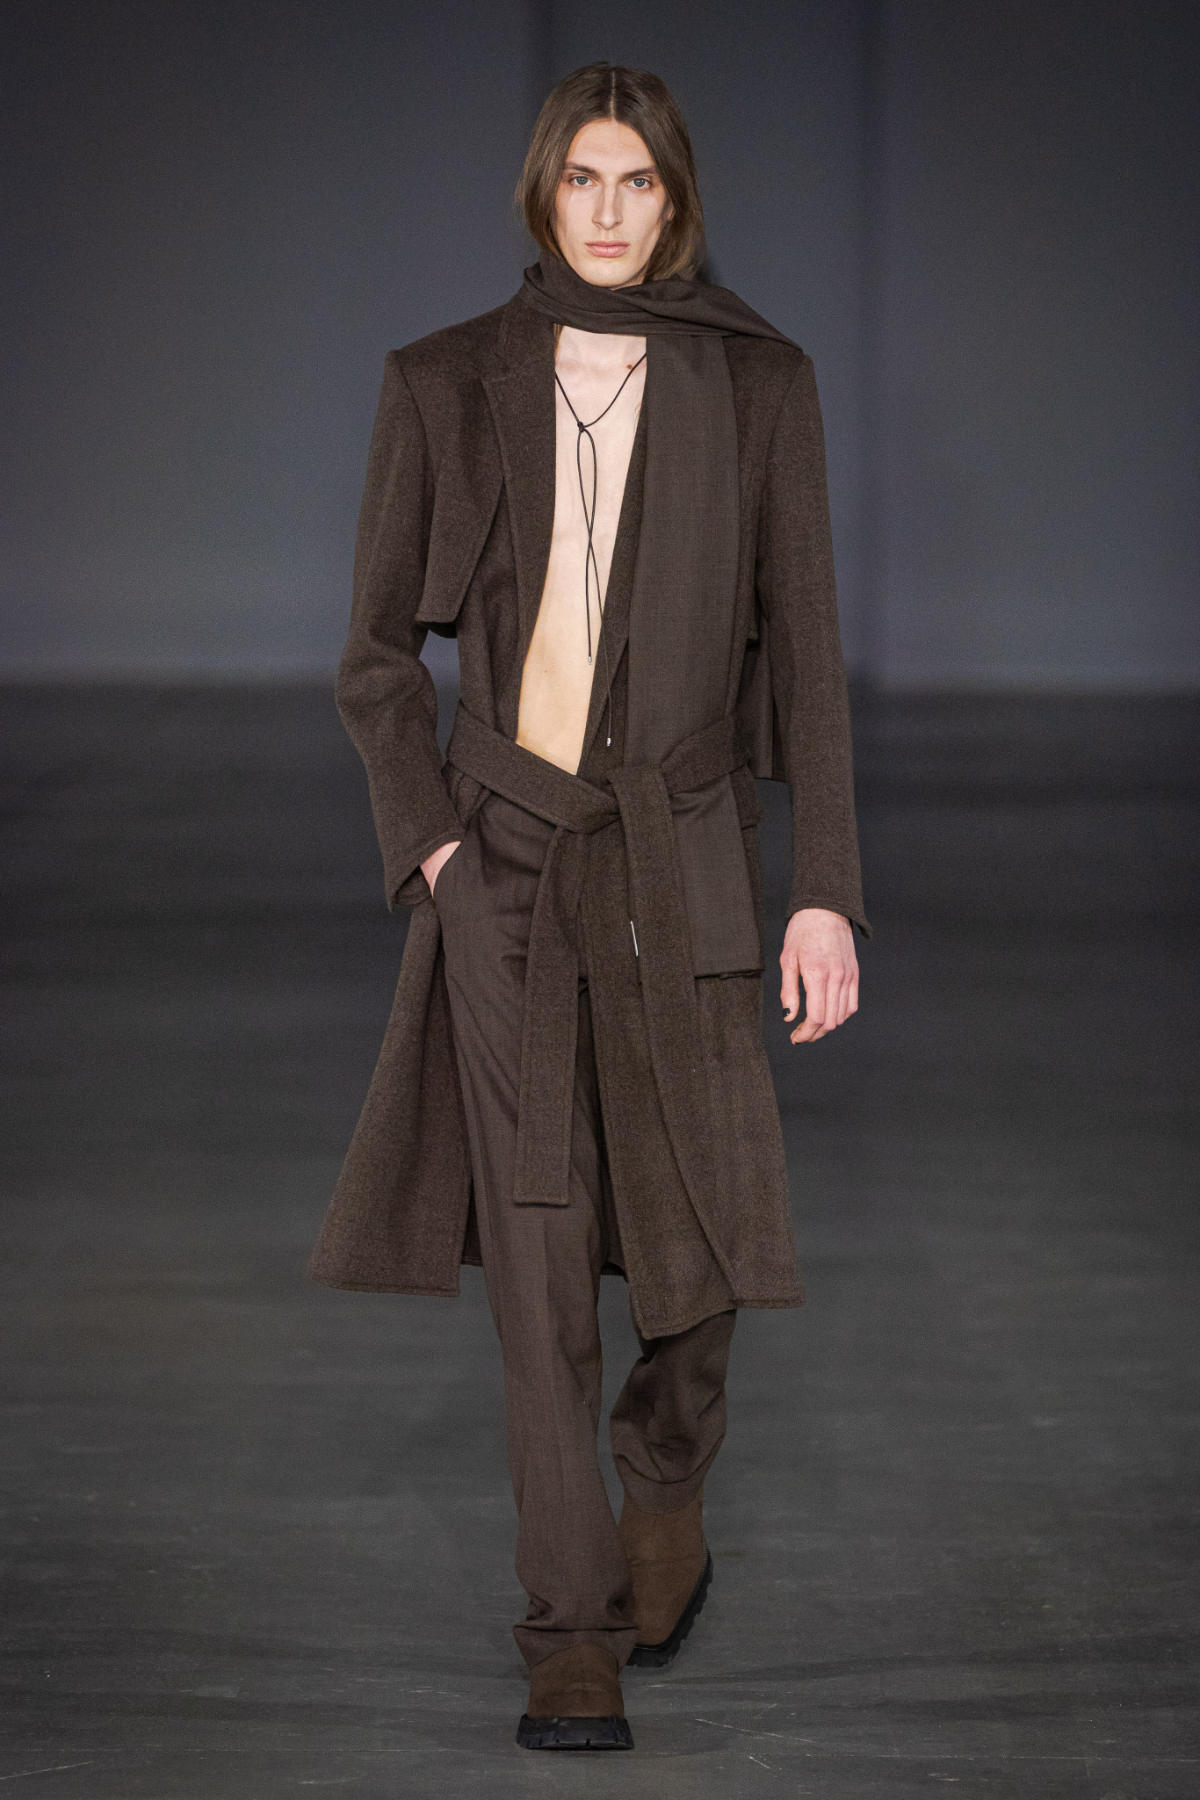 Ludovic De Saint Sernin Presents Its New Fall-Winter 2022 Collection: All The Rumours Are True